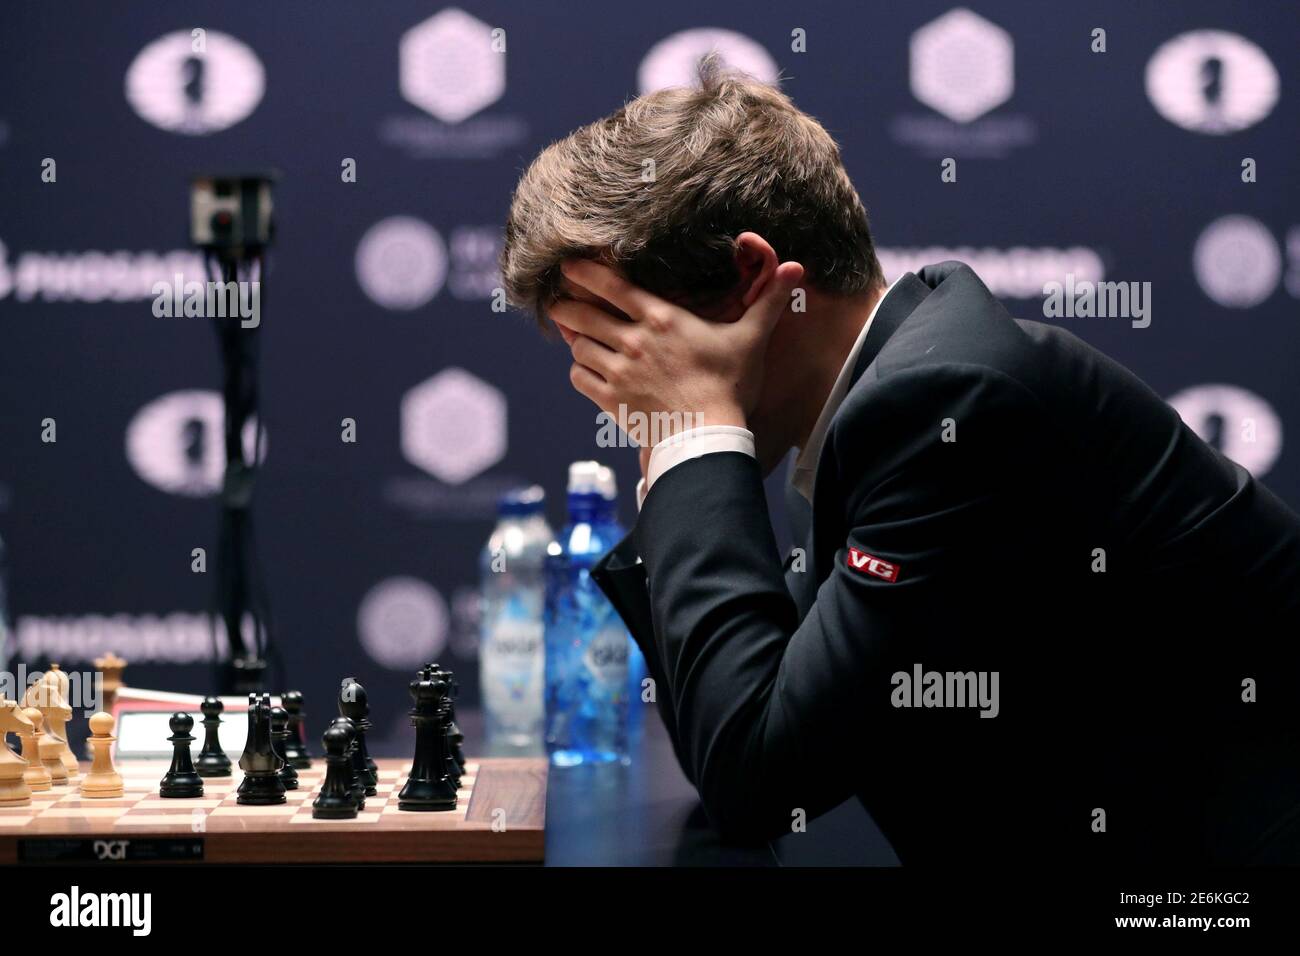 Current World Chess Champion Magnus Carlsen of Norway, reacts to a move  from Sergey Karjakin of Russia during the first game of their rapid chess  tie-breaker match, at the 2016 World Chess